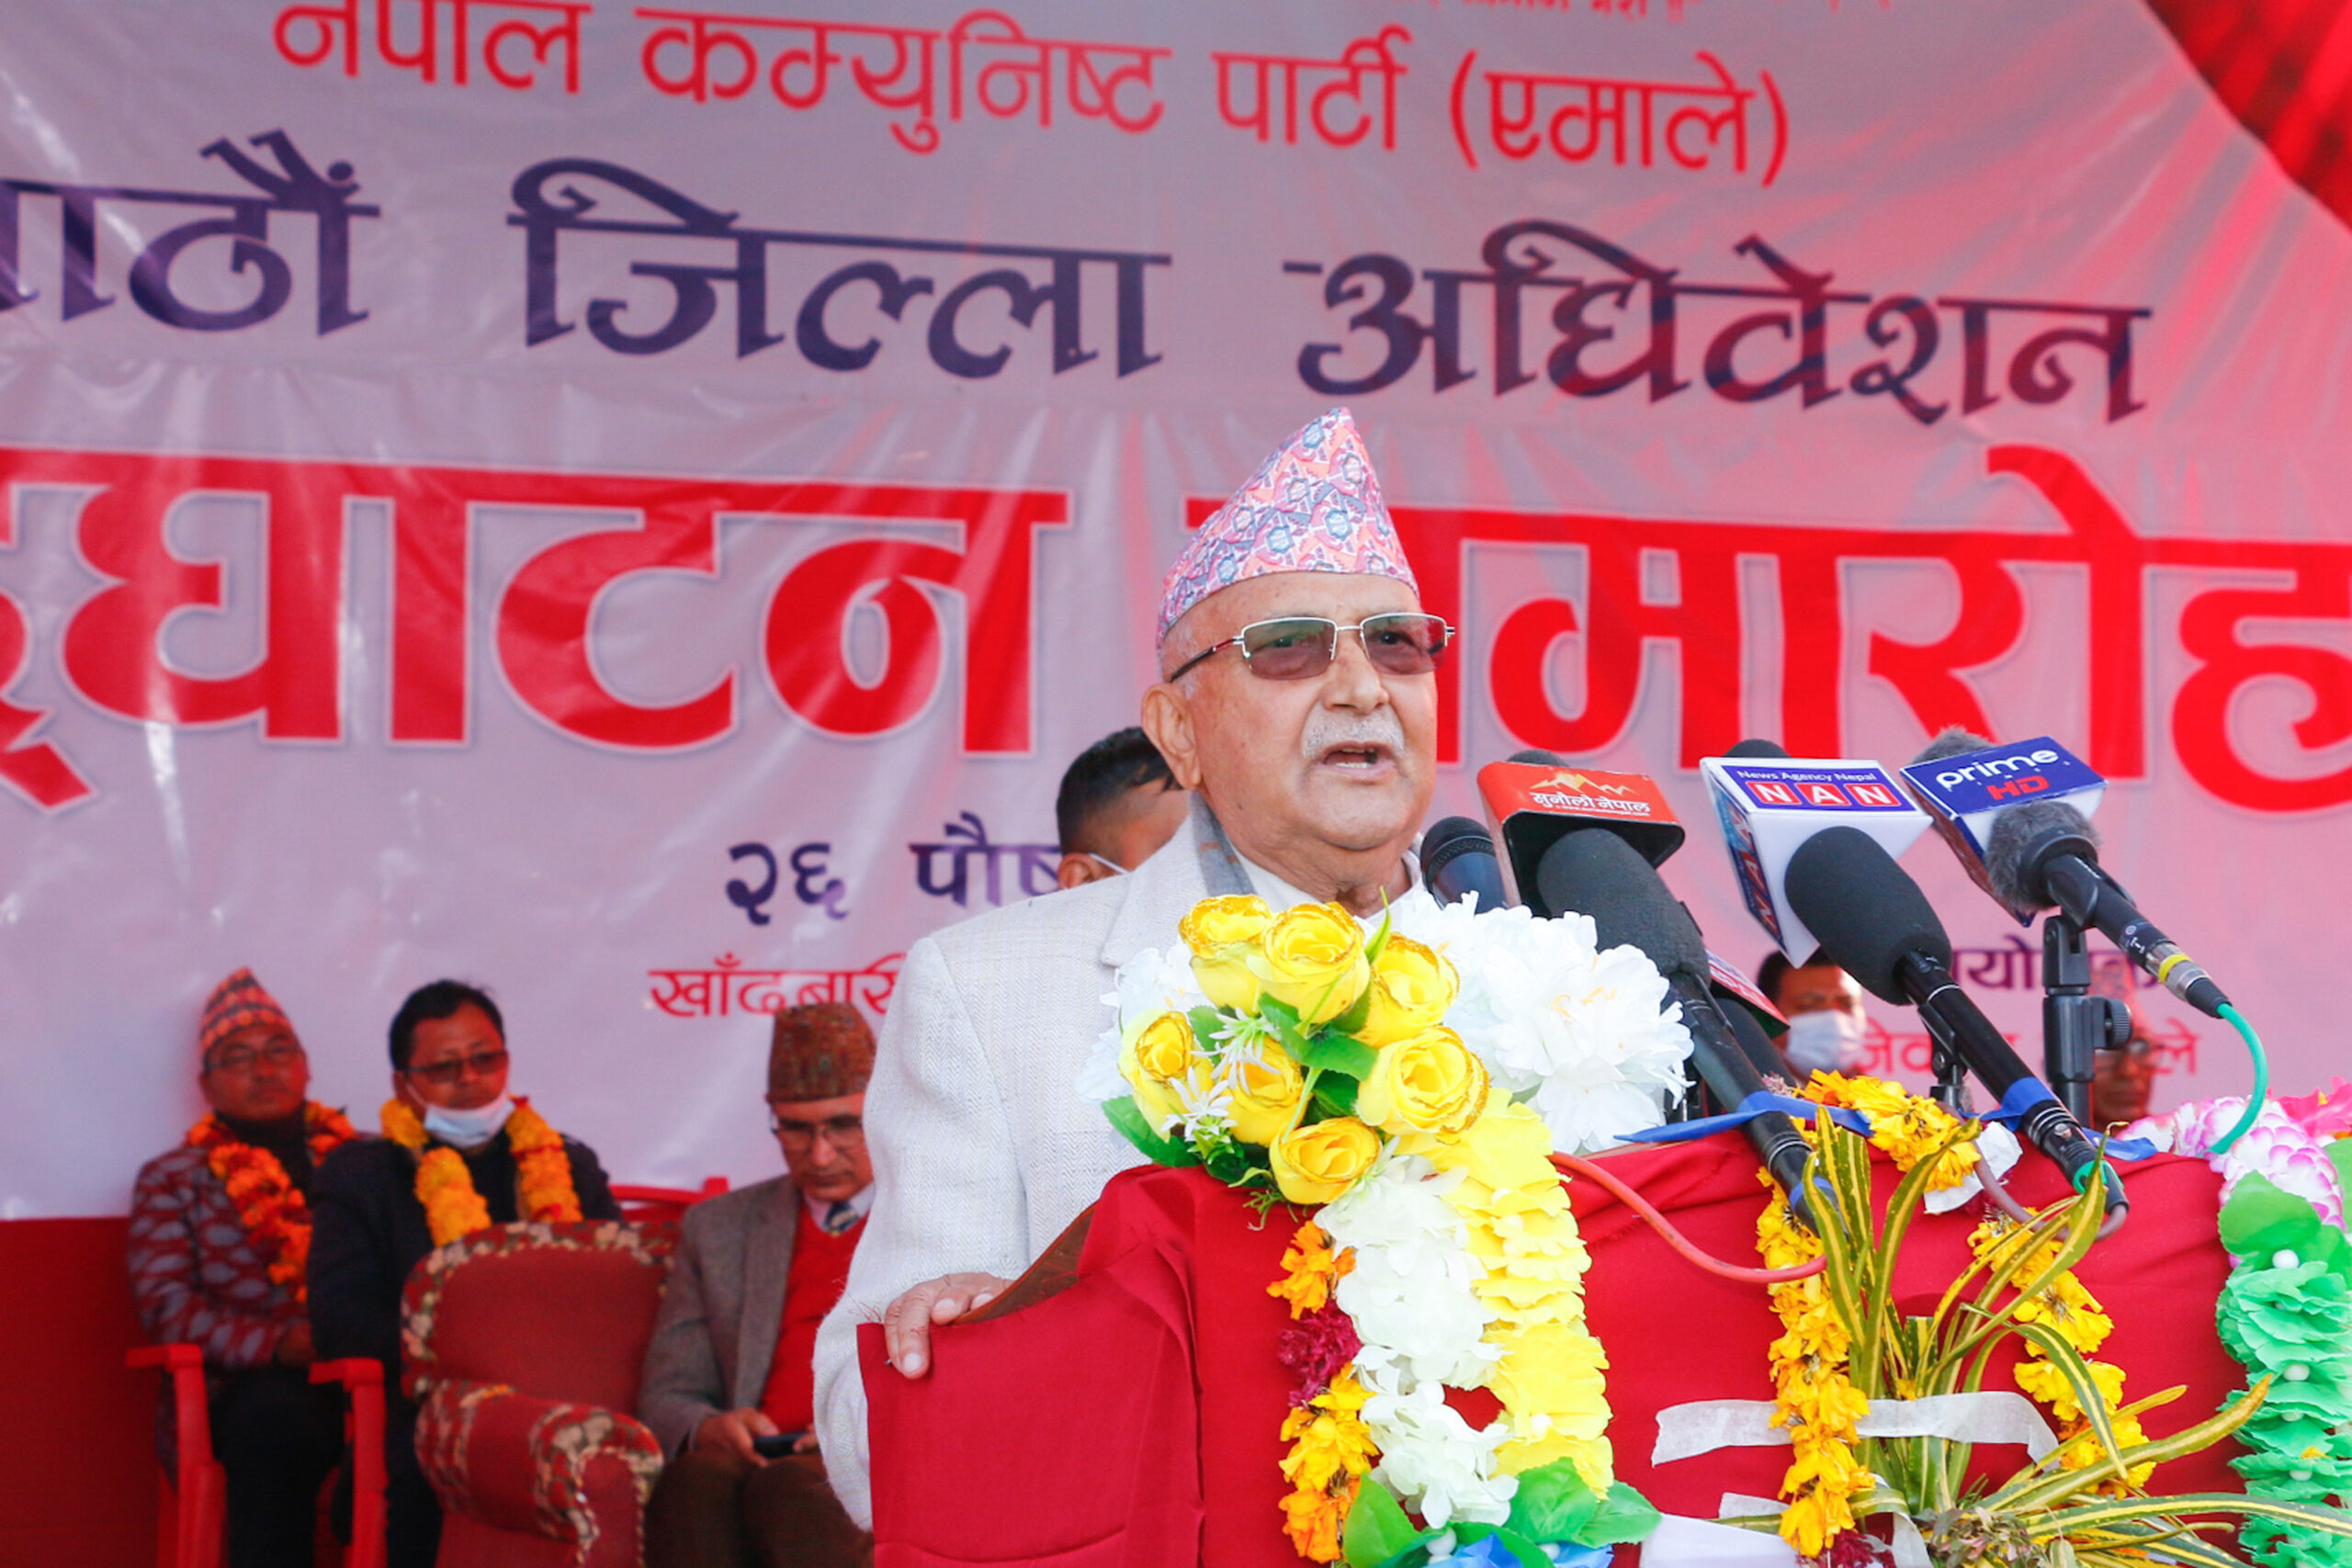 Oli’s claim: Only UML can develop Nepal